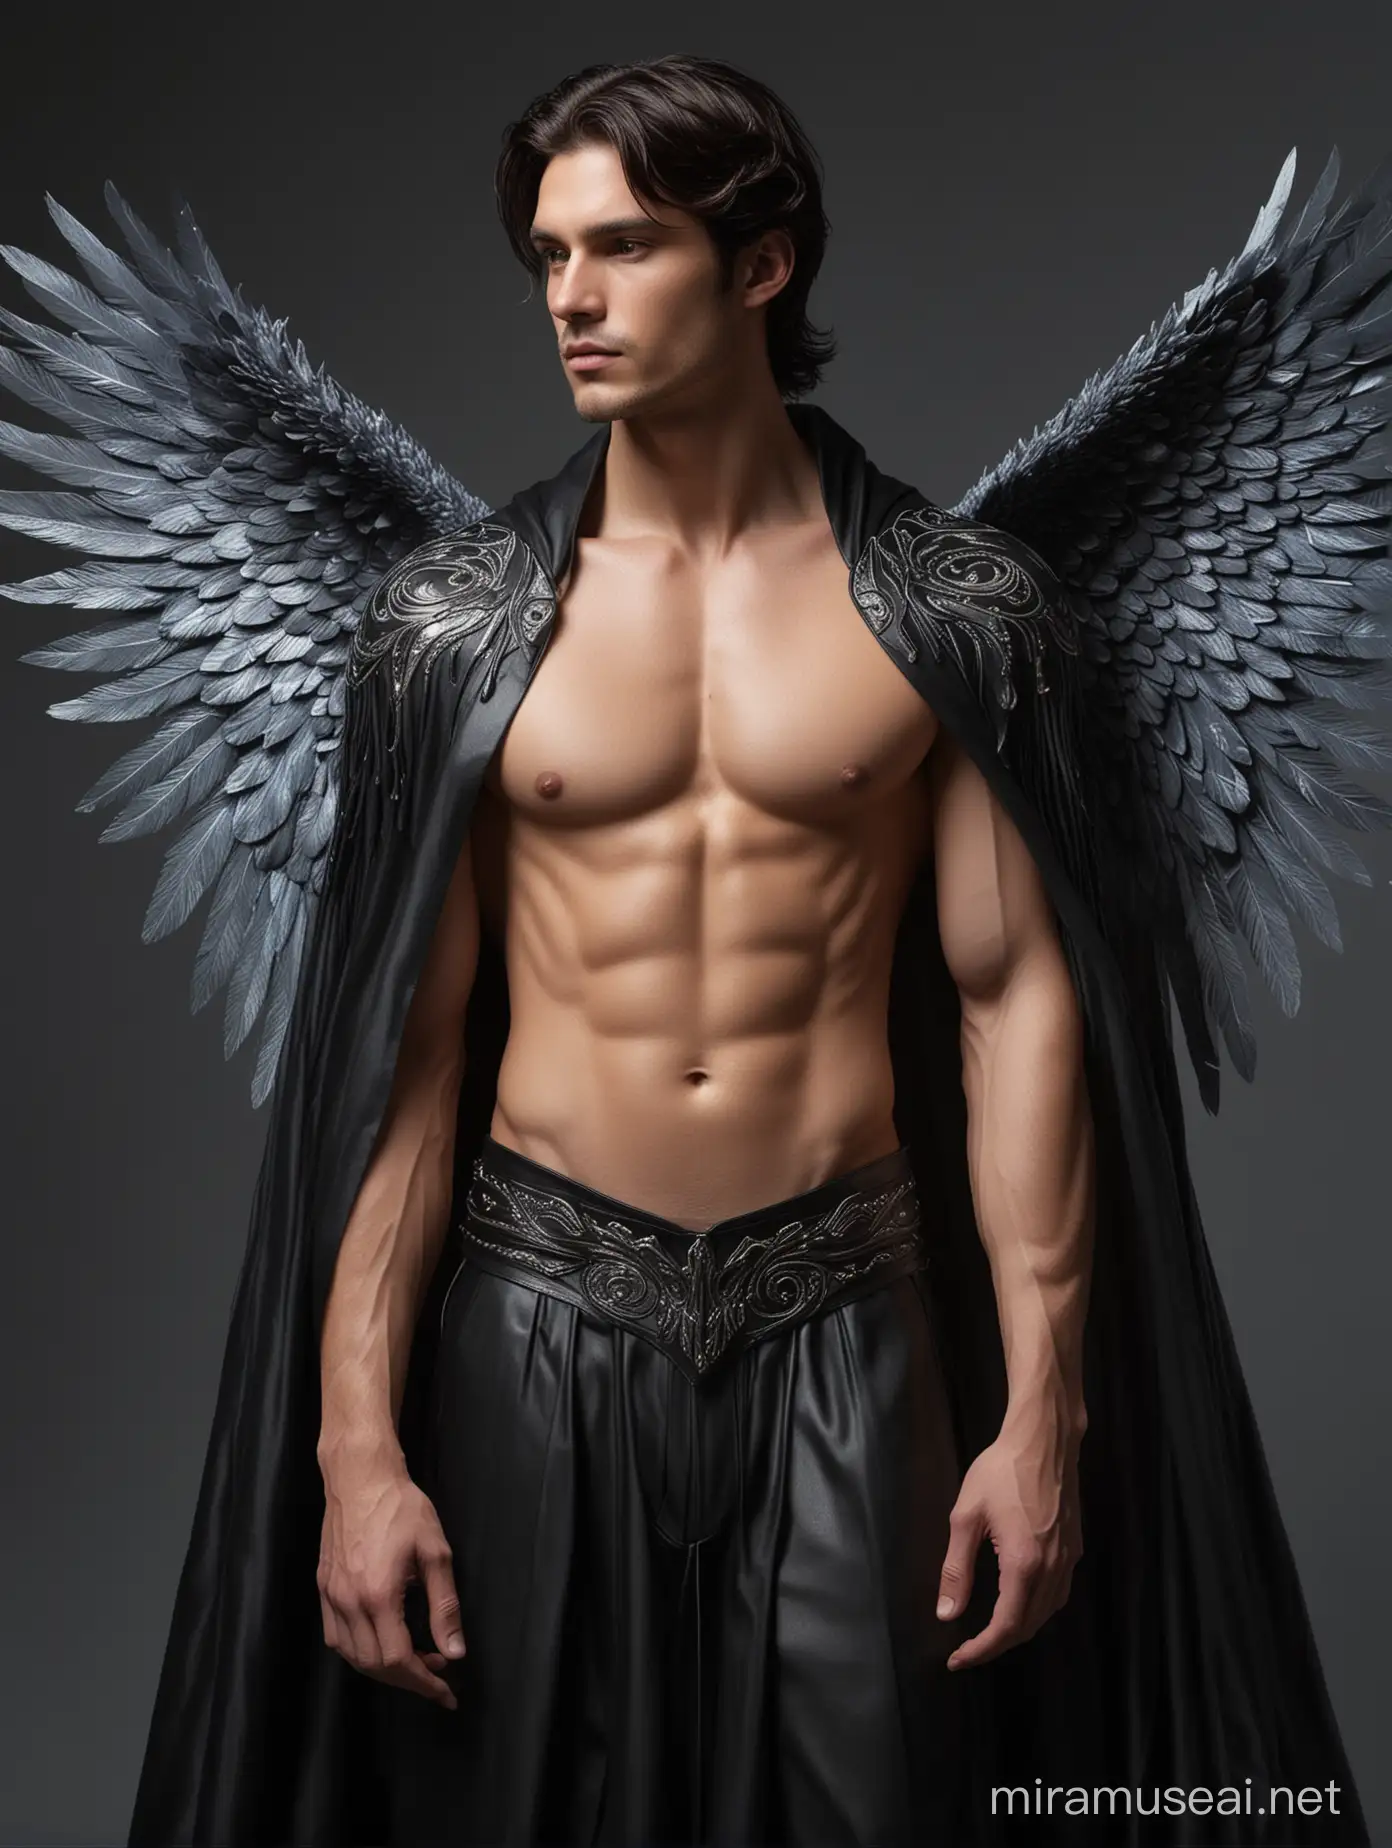 Ethereal Male Seraphim with Galactic Wings in Dramatic Lighting